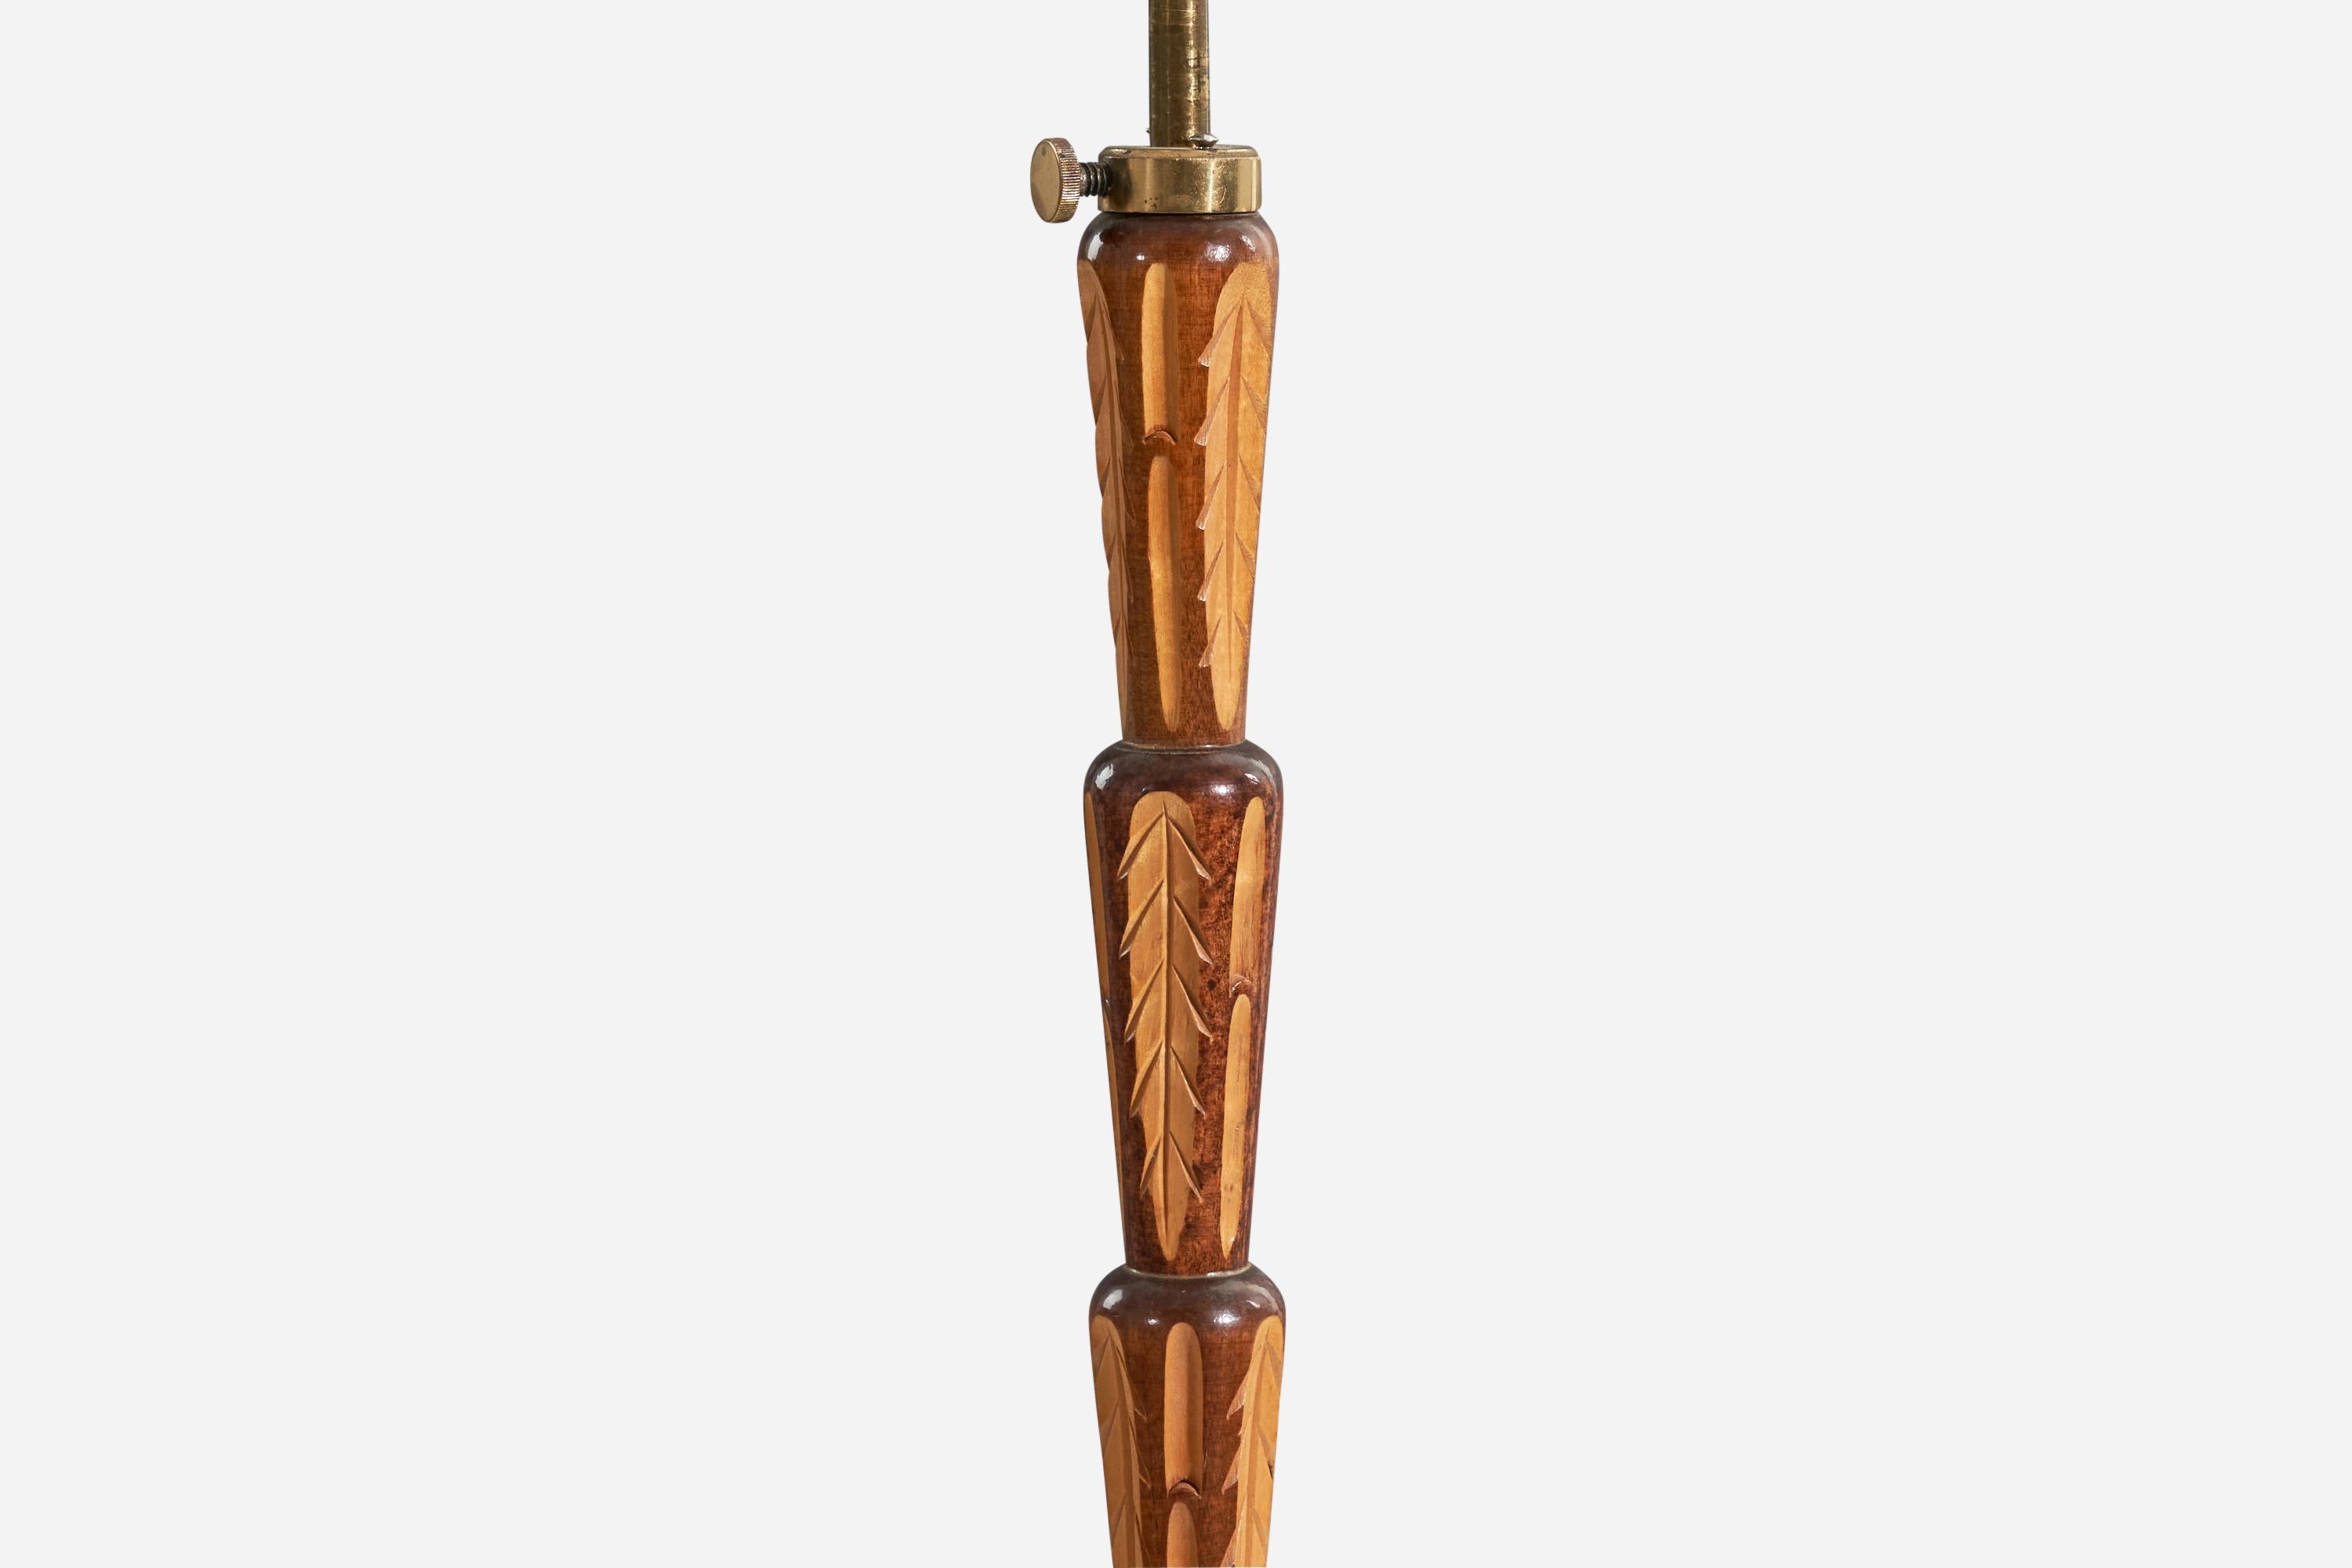 Swedish Designer, Floor Lamp, Inlaid Wood, Brass, Rattan, Sweden, 1930s In Good Condition For Sale In High Point, NC